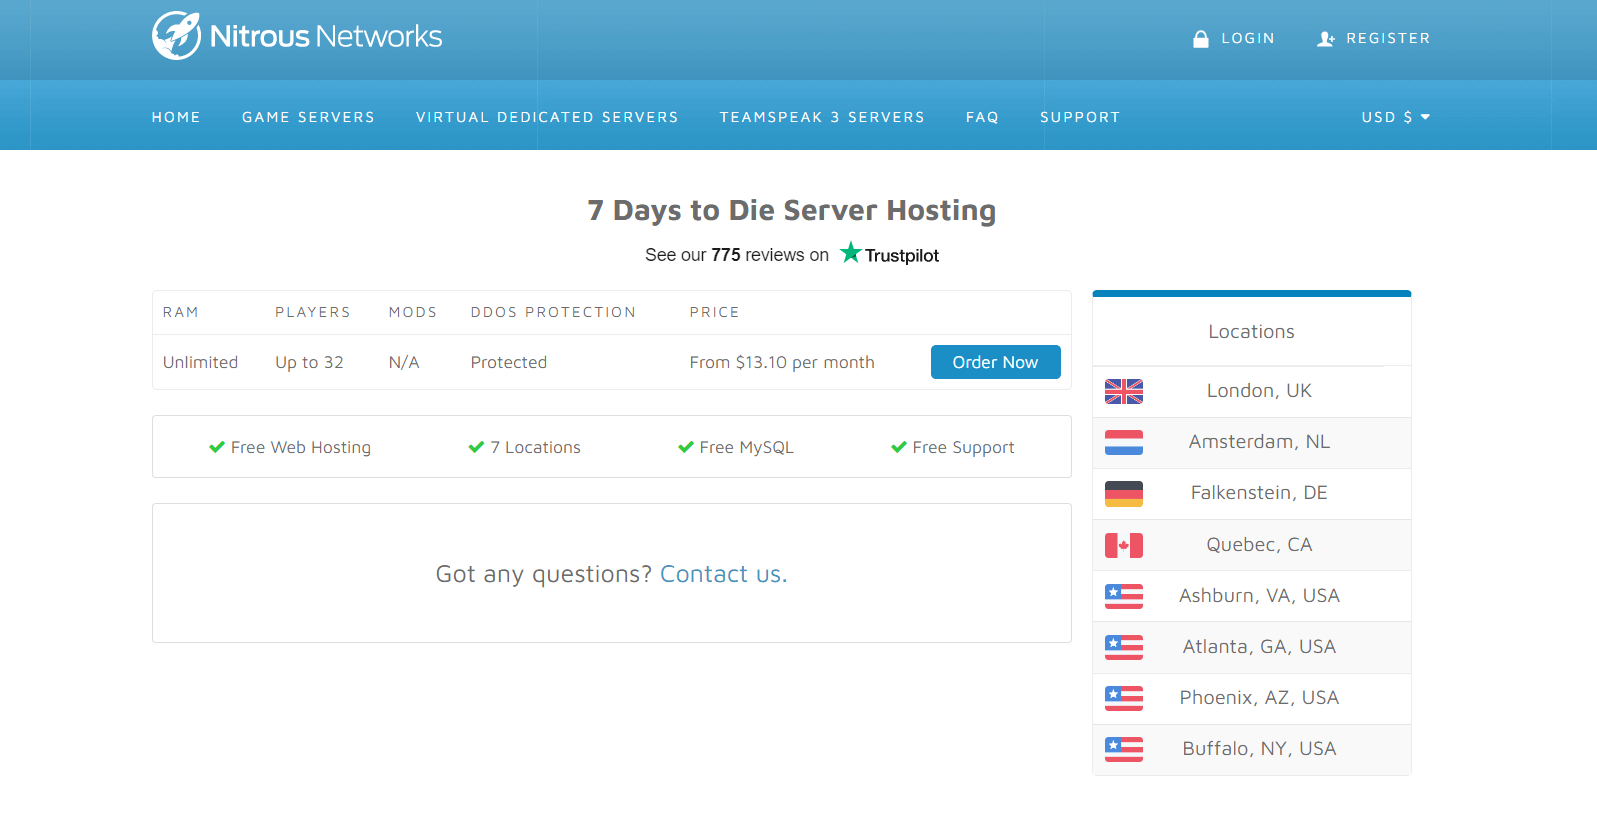 Nitrous Networks - Reliable 7 Days to Die Hosting